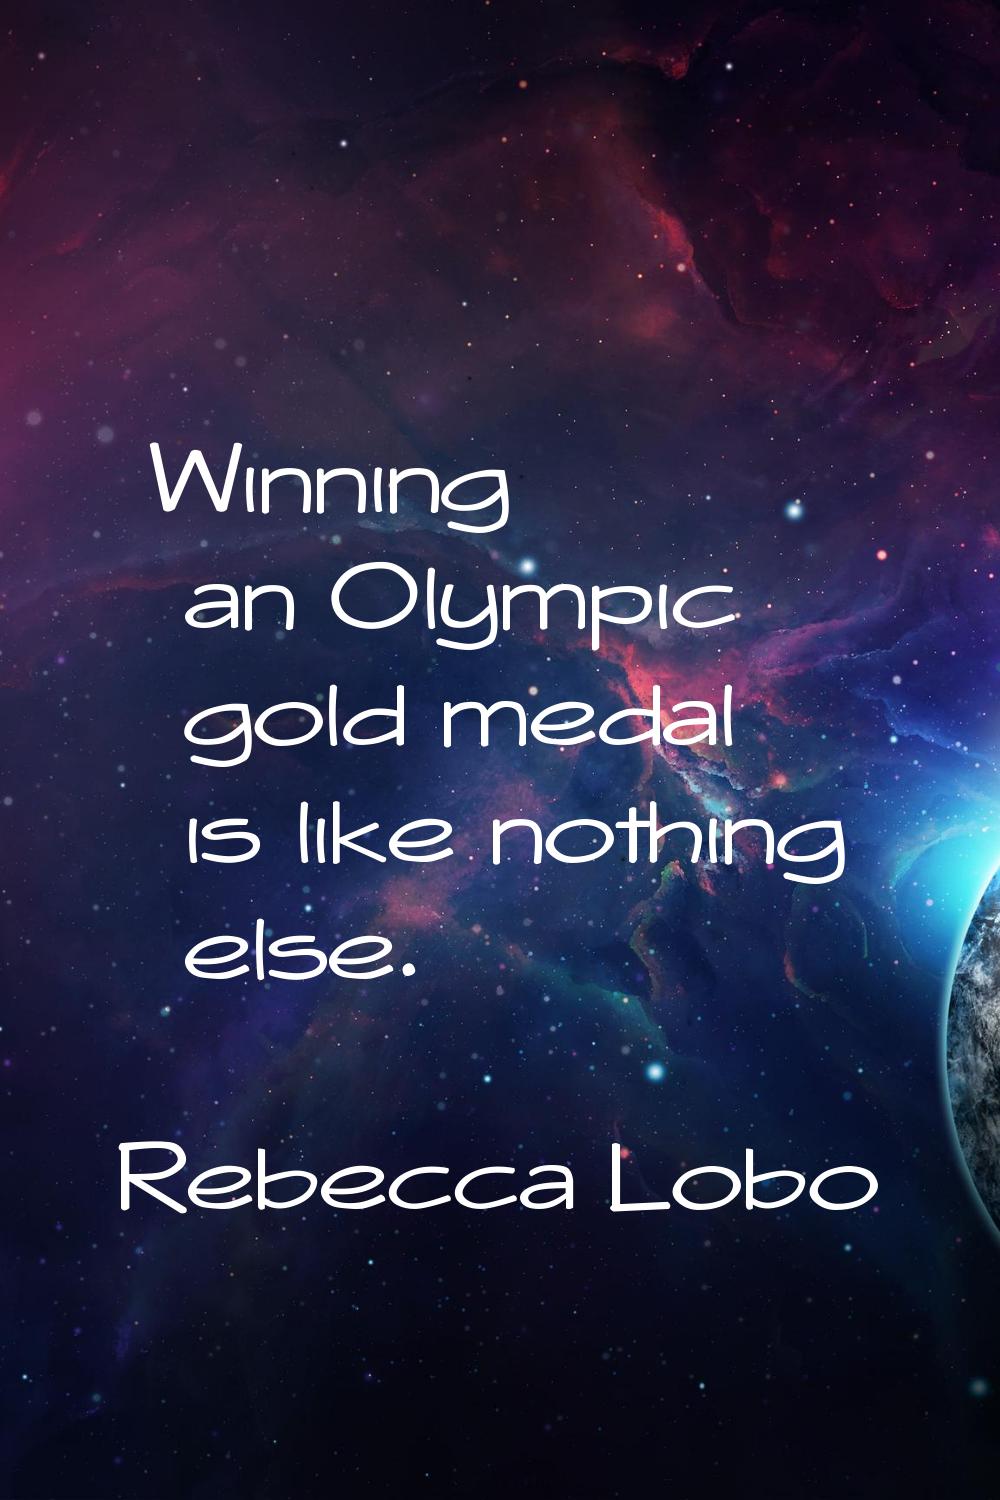 Winning an Olympic gold medal is like nothing else.